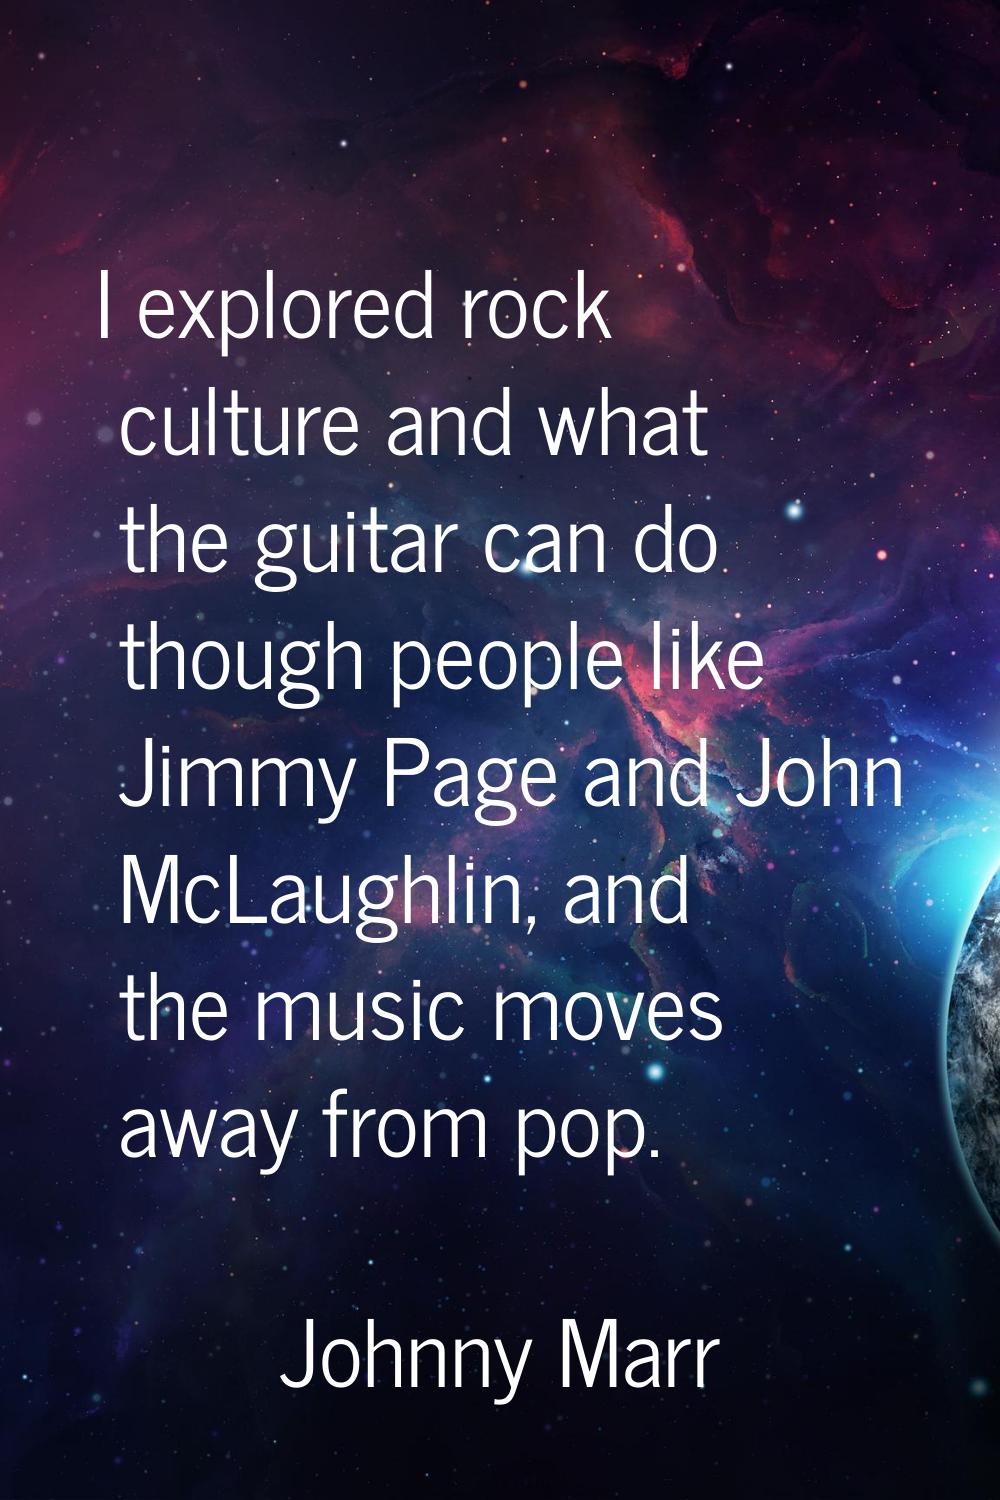 I explored rock culture and what the guitar can do though people like Jimmy Page and John McLaughli